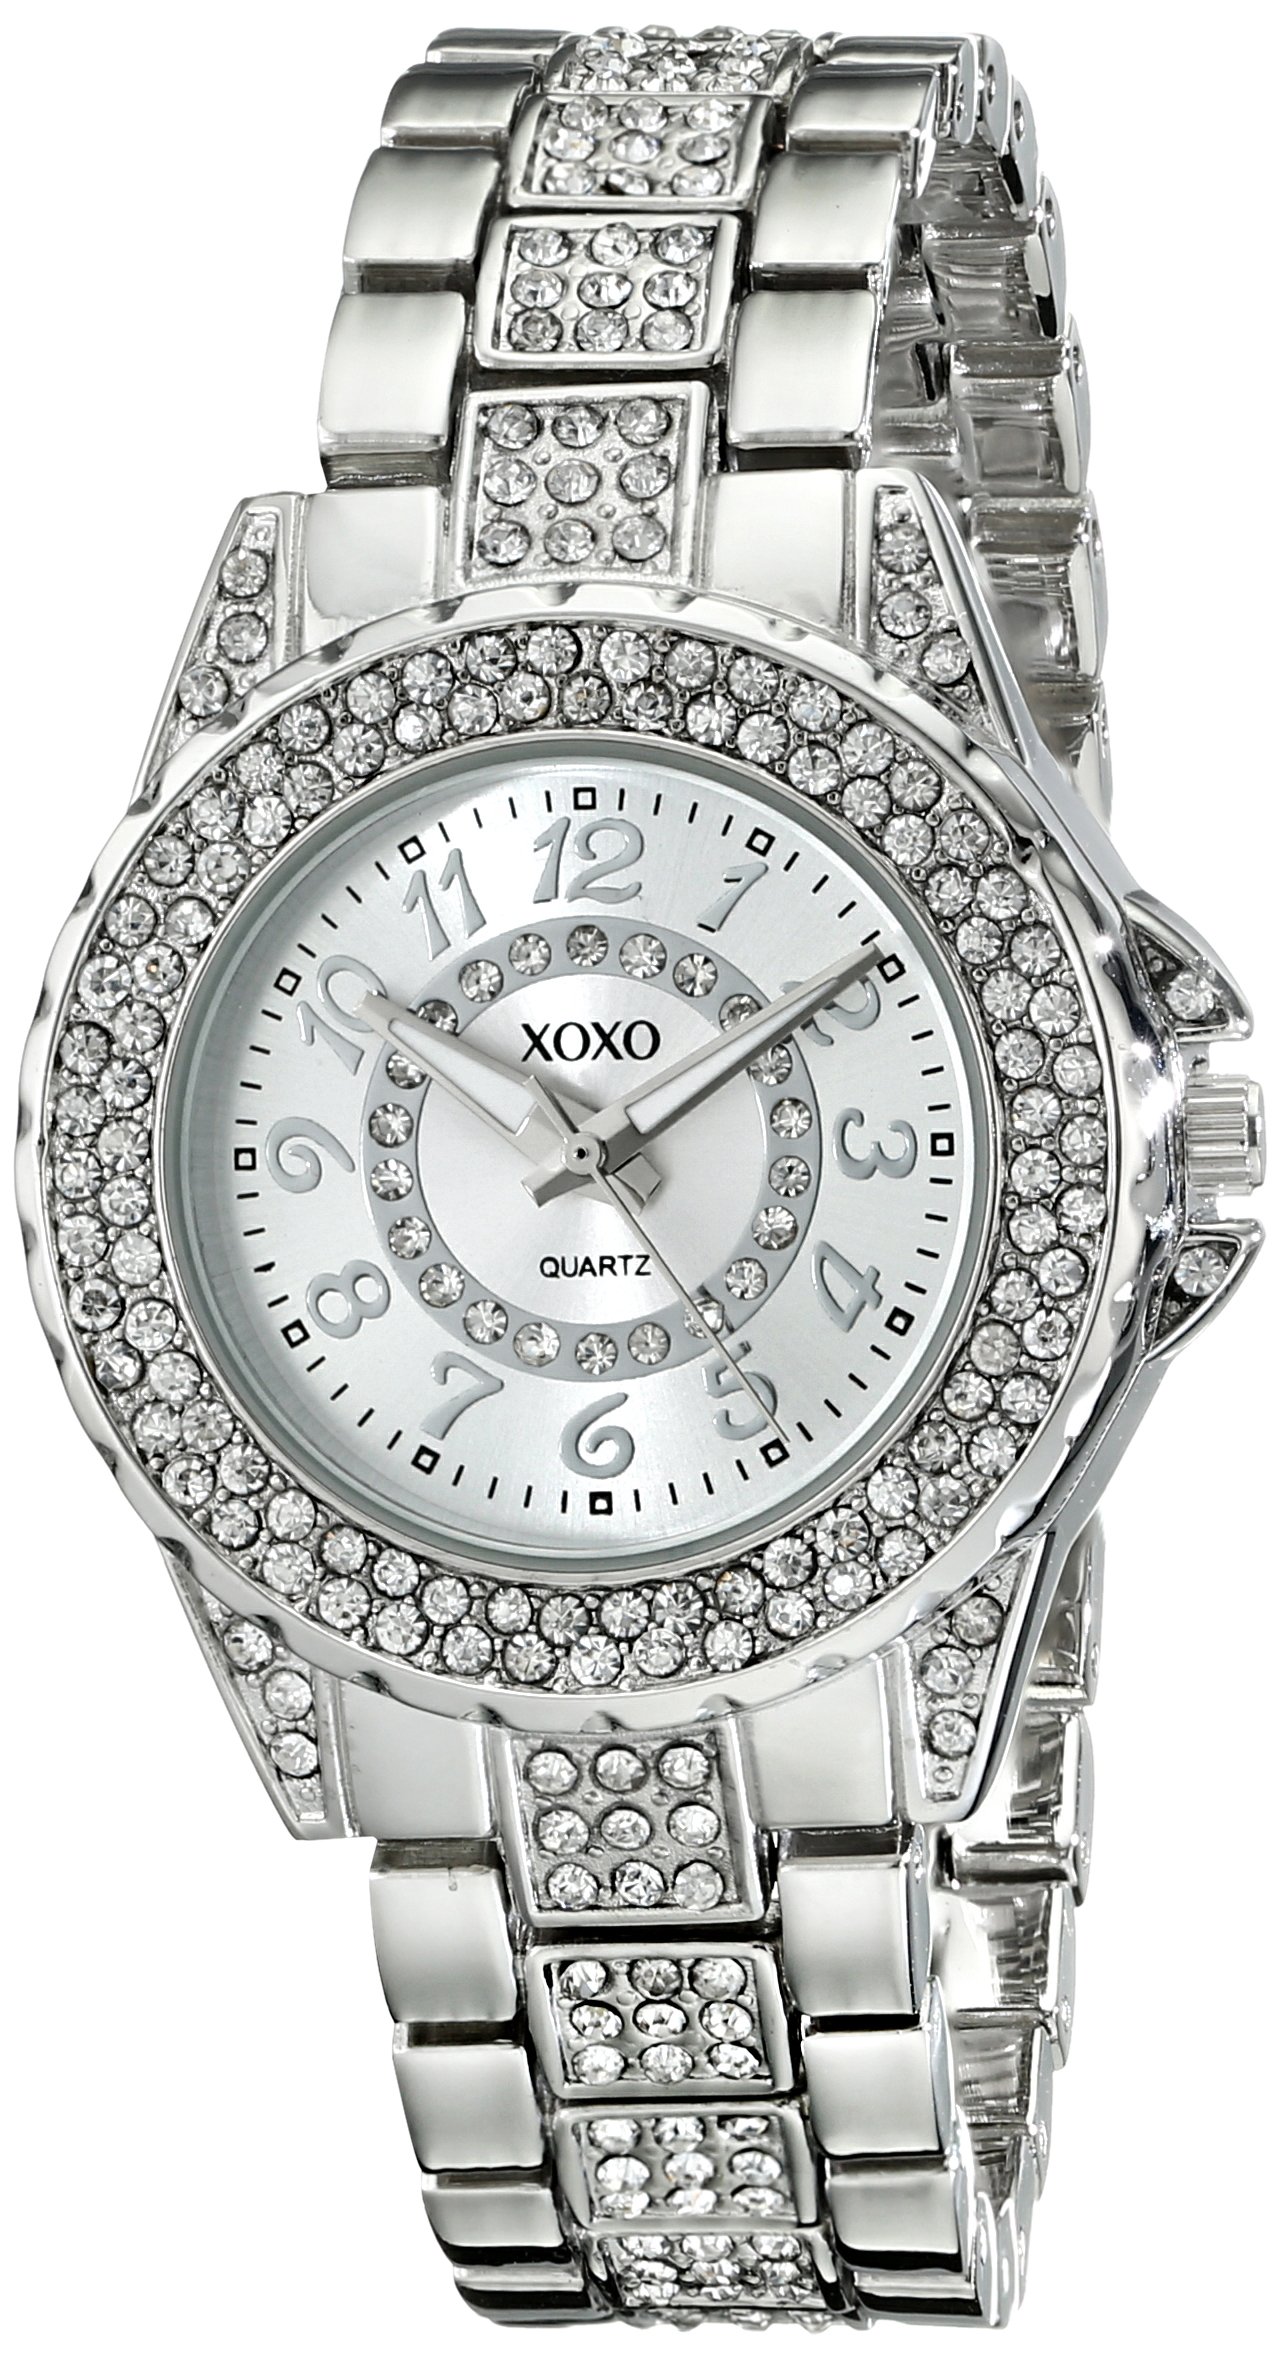 Accutime XOXO Women's Analog Watch with Silver-Tone Case, Rhinestone Bezel/Dial/Band, Silver-Tone Sunray Dial - Official XOXO Woman's Watch, Jewelry-Clasp Closure - Model: XO5746